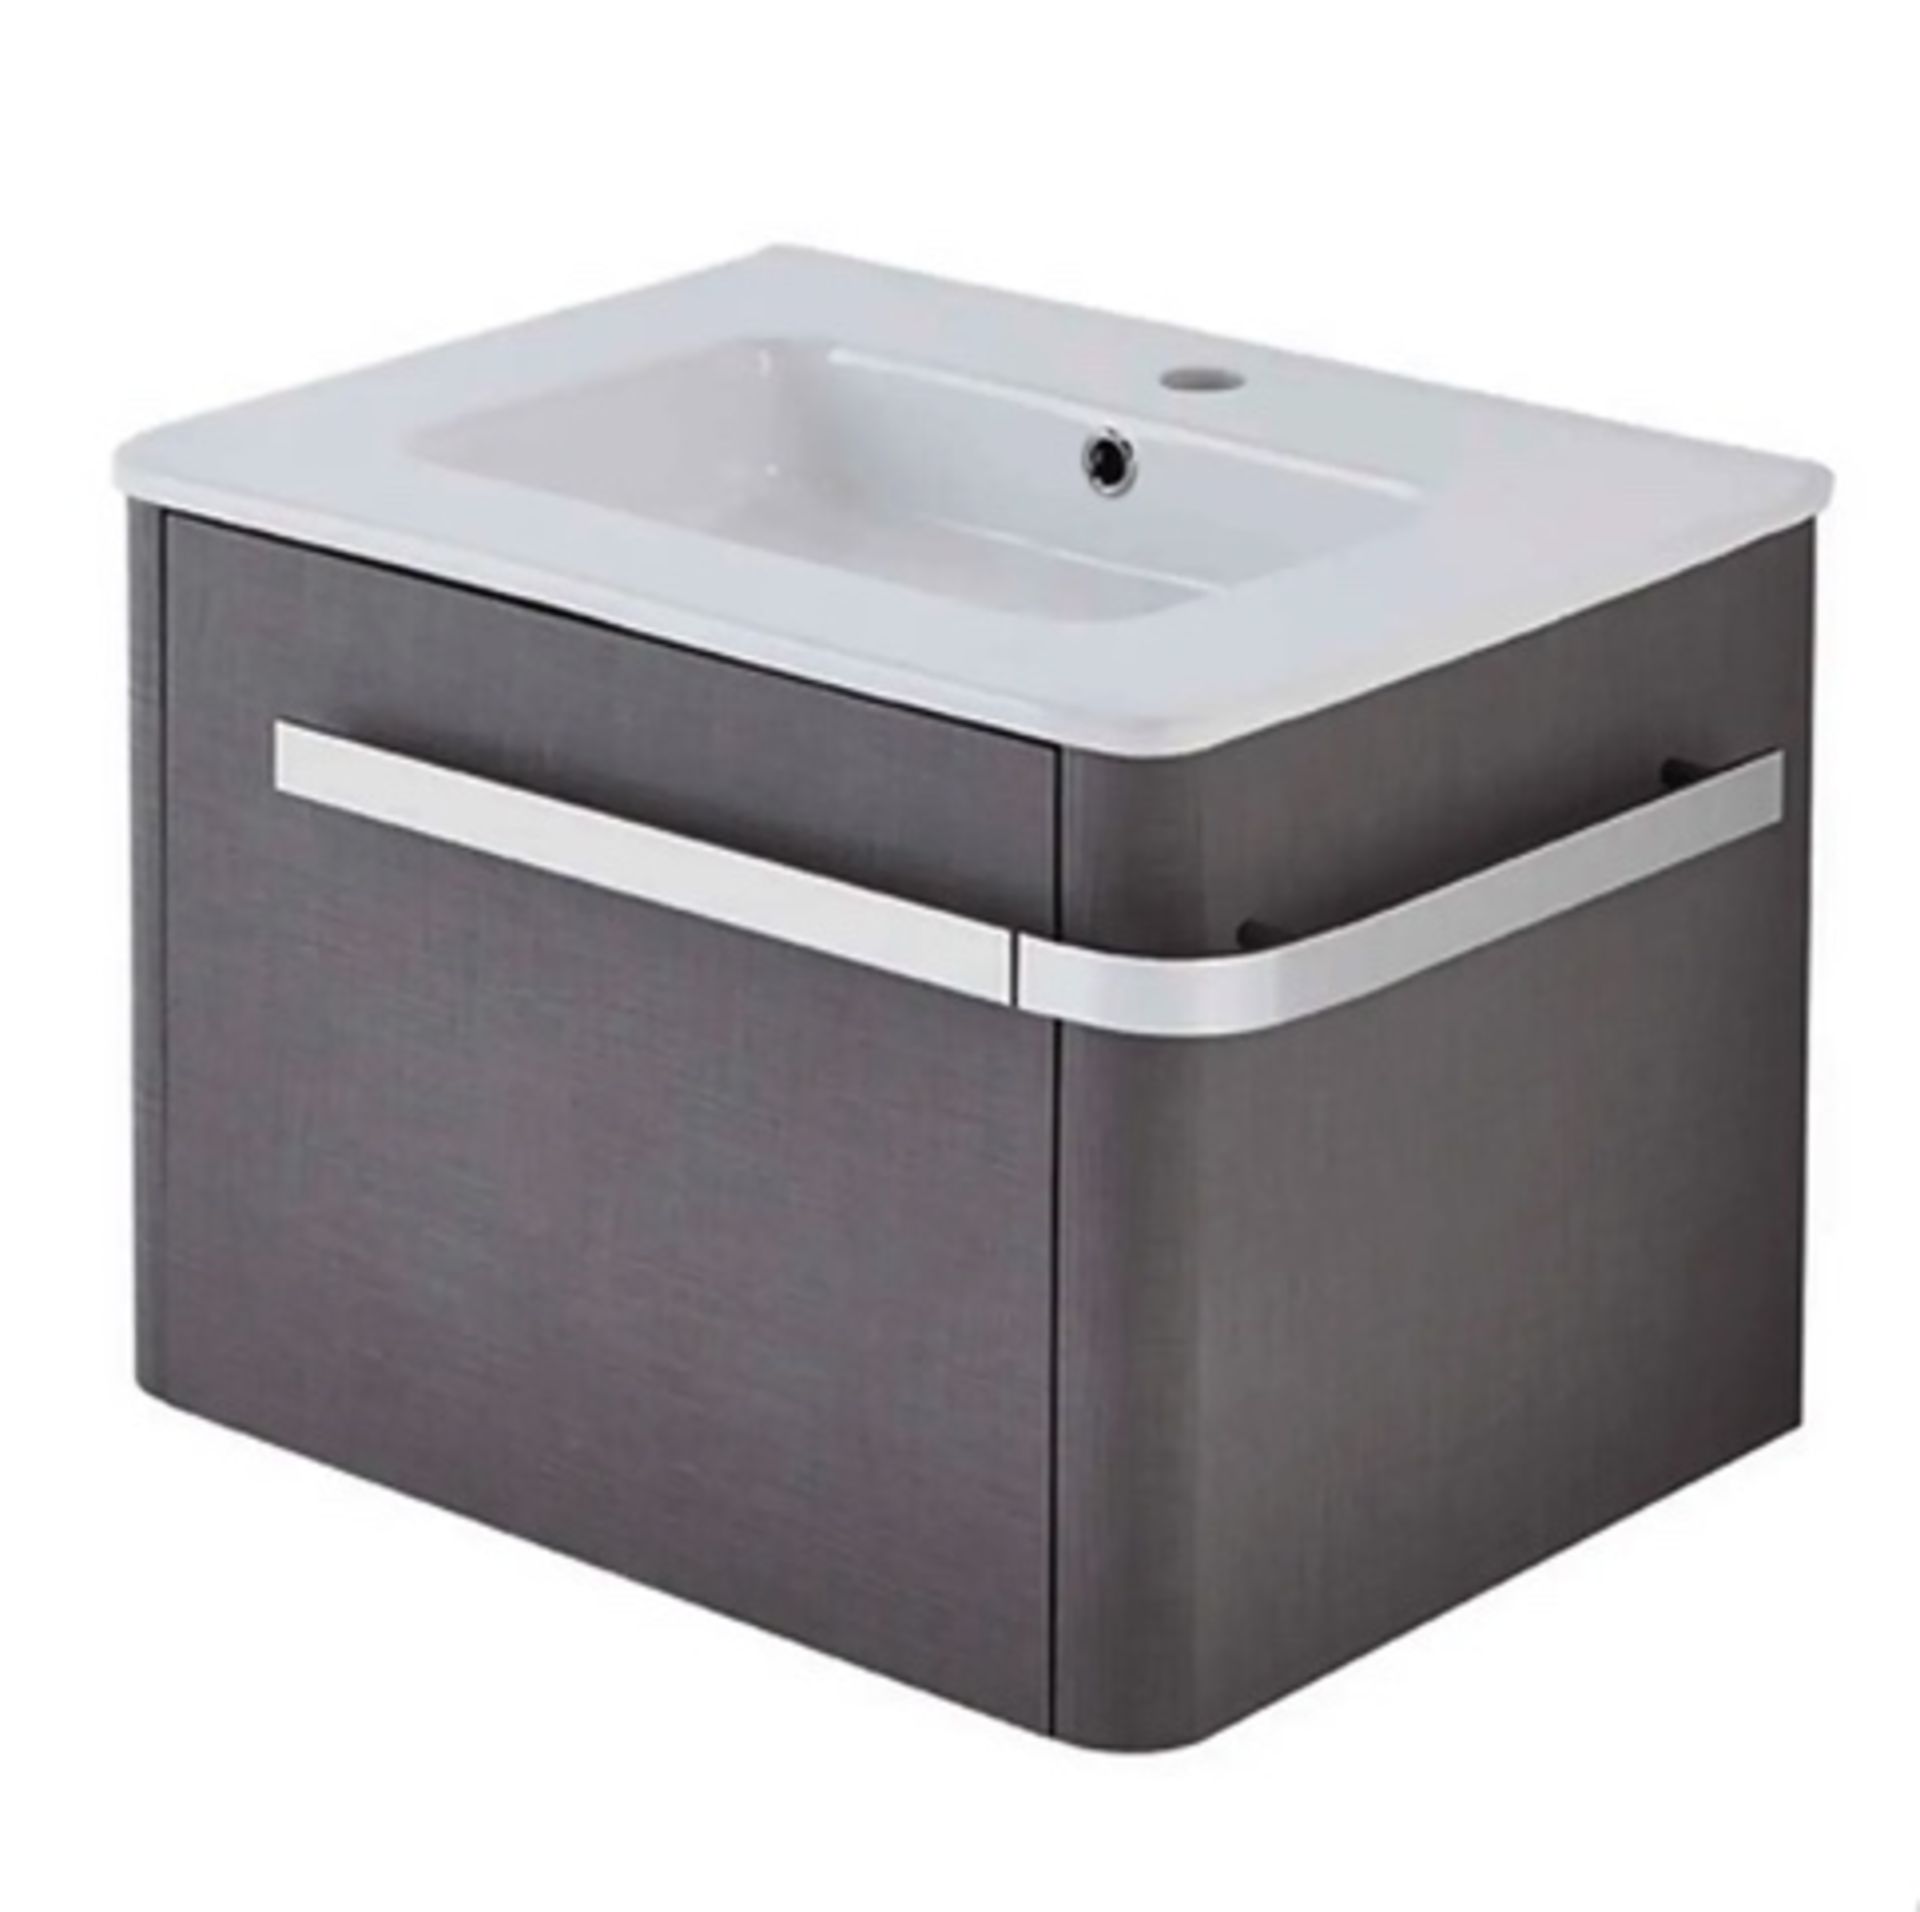 Brand New Boxed Linen 600mm Wall Hung Vanity Unit with Basin - Grey RRP £595 **No Vat**